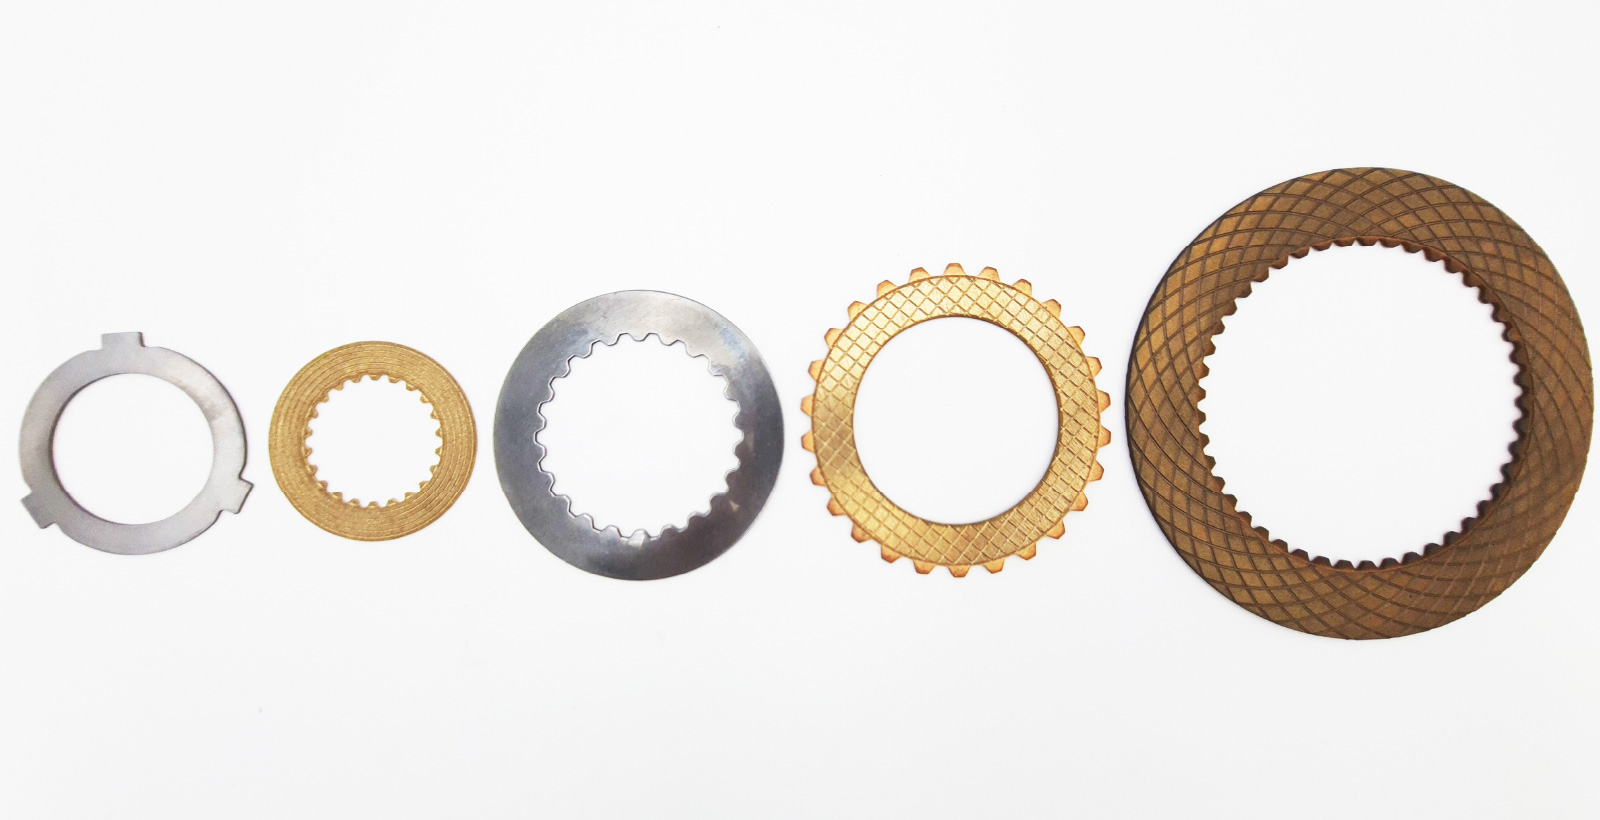 Carbon Transmission Discs for Forestry and Timber Industry